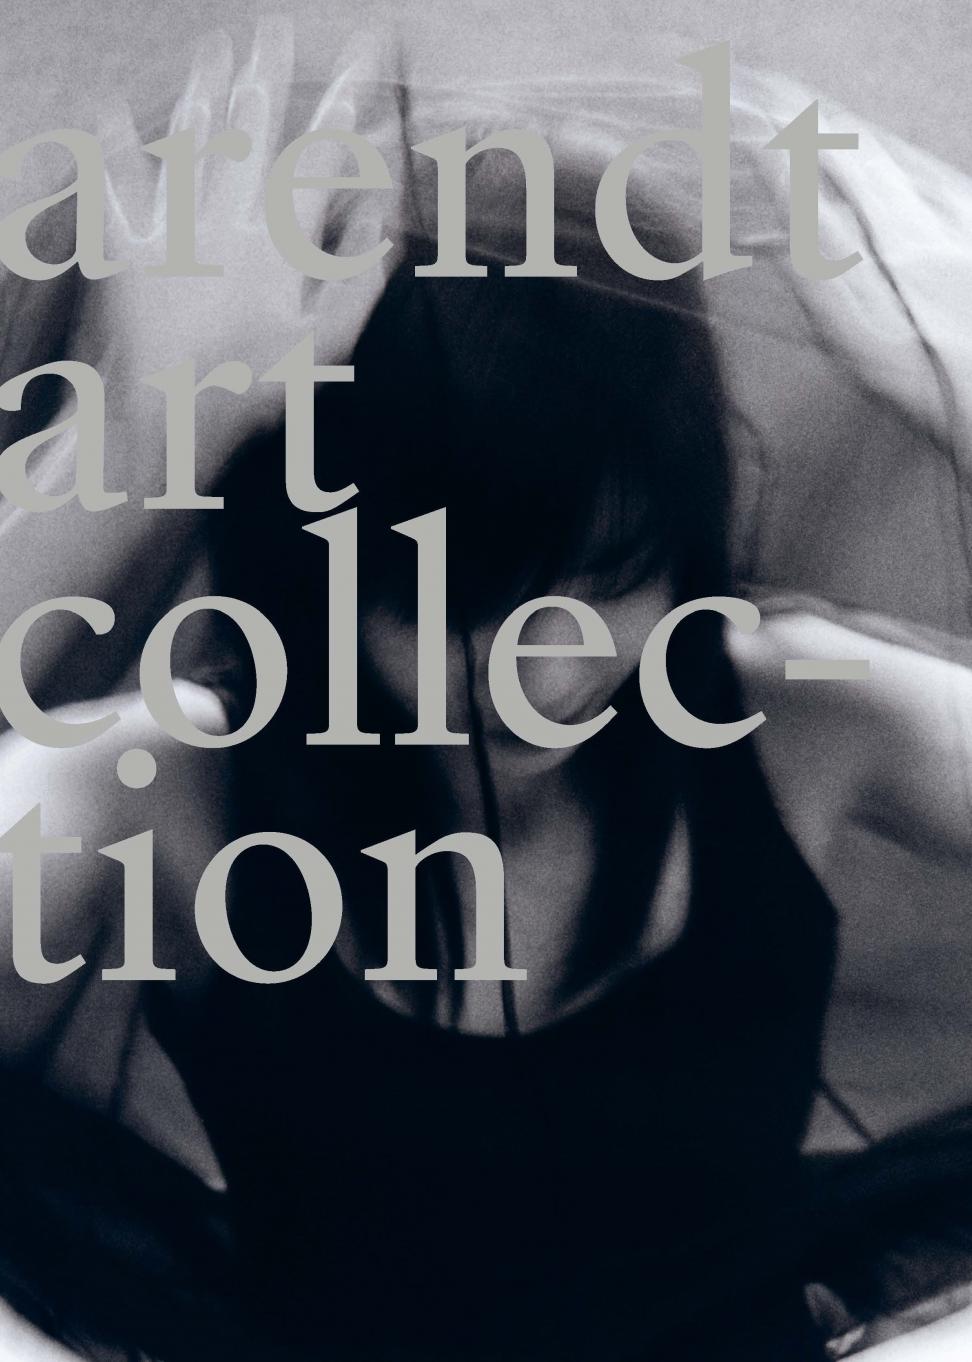 Arendt art collection